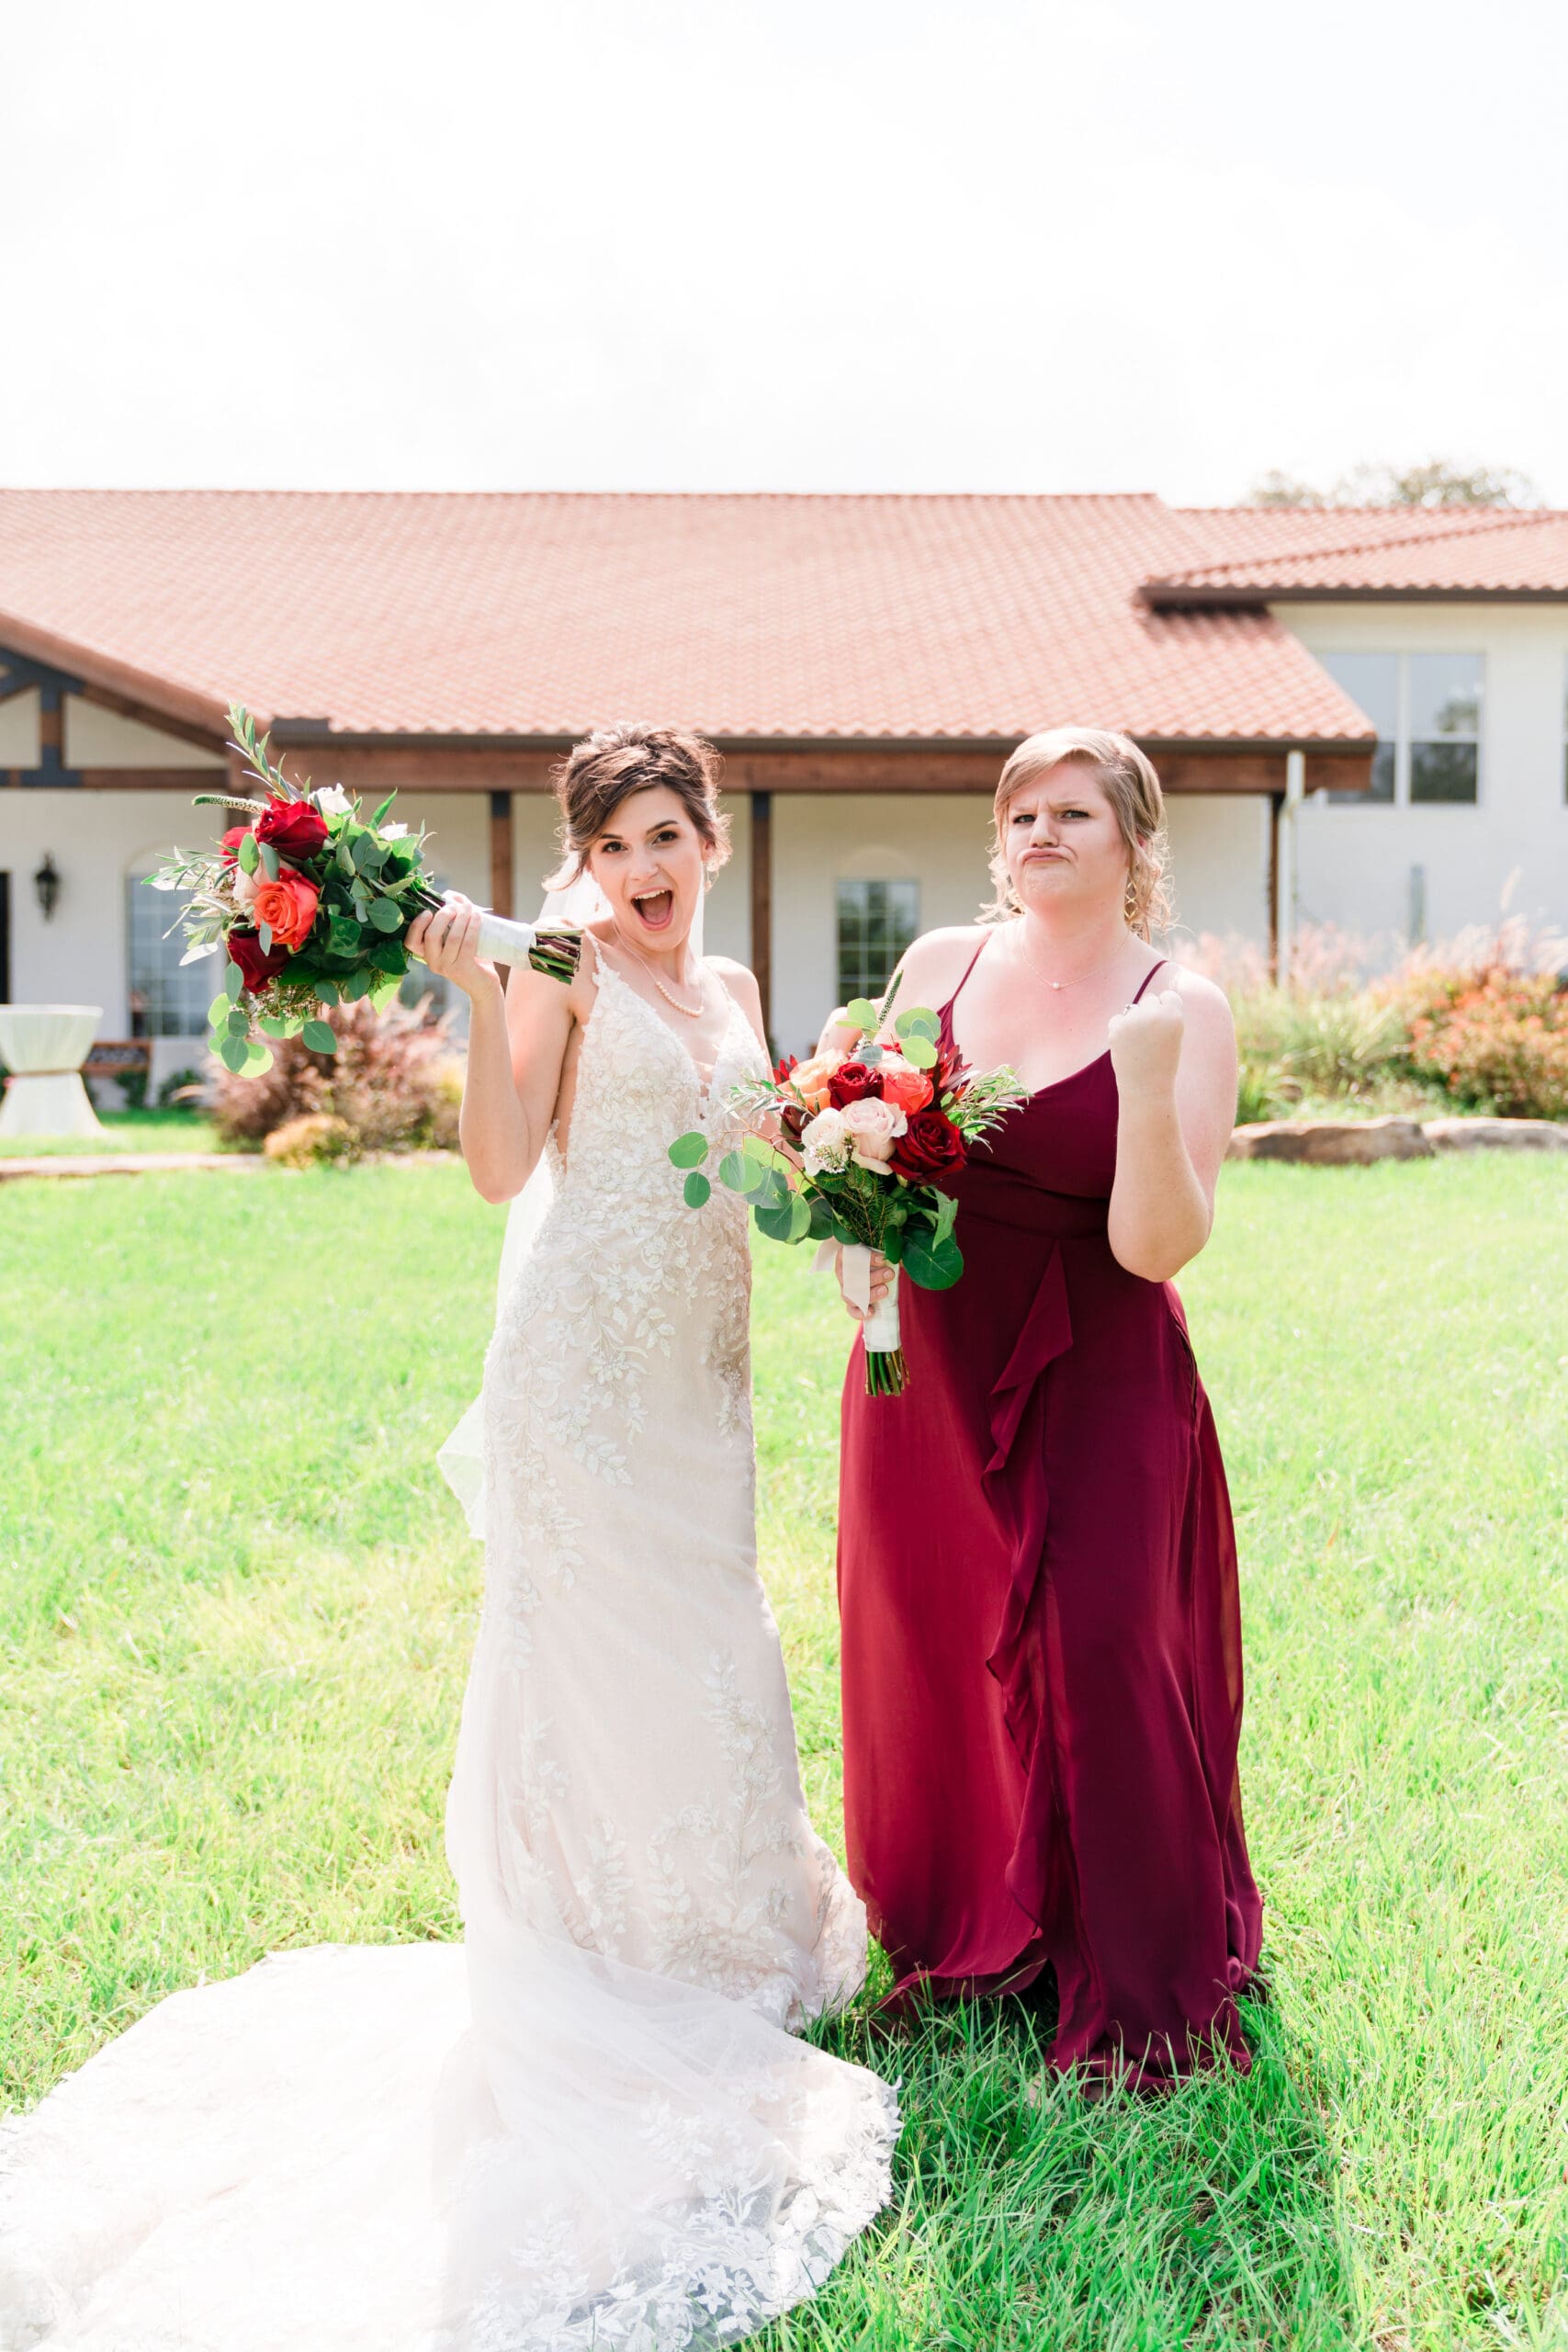 Bethany and her Maid of Honor goofing around in the garden at Sterling Event Venue, holding flowers and laughing.